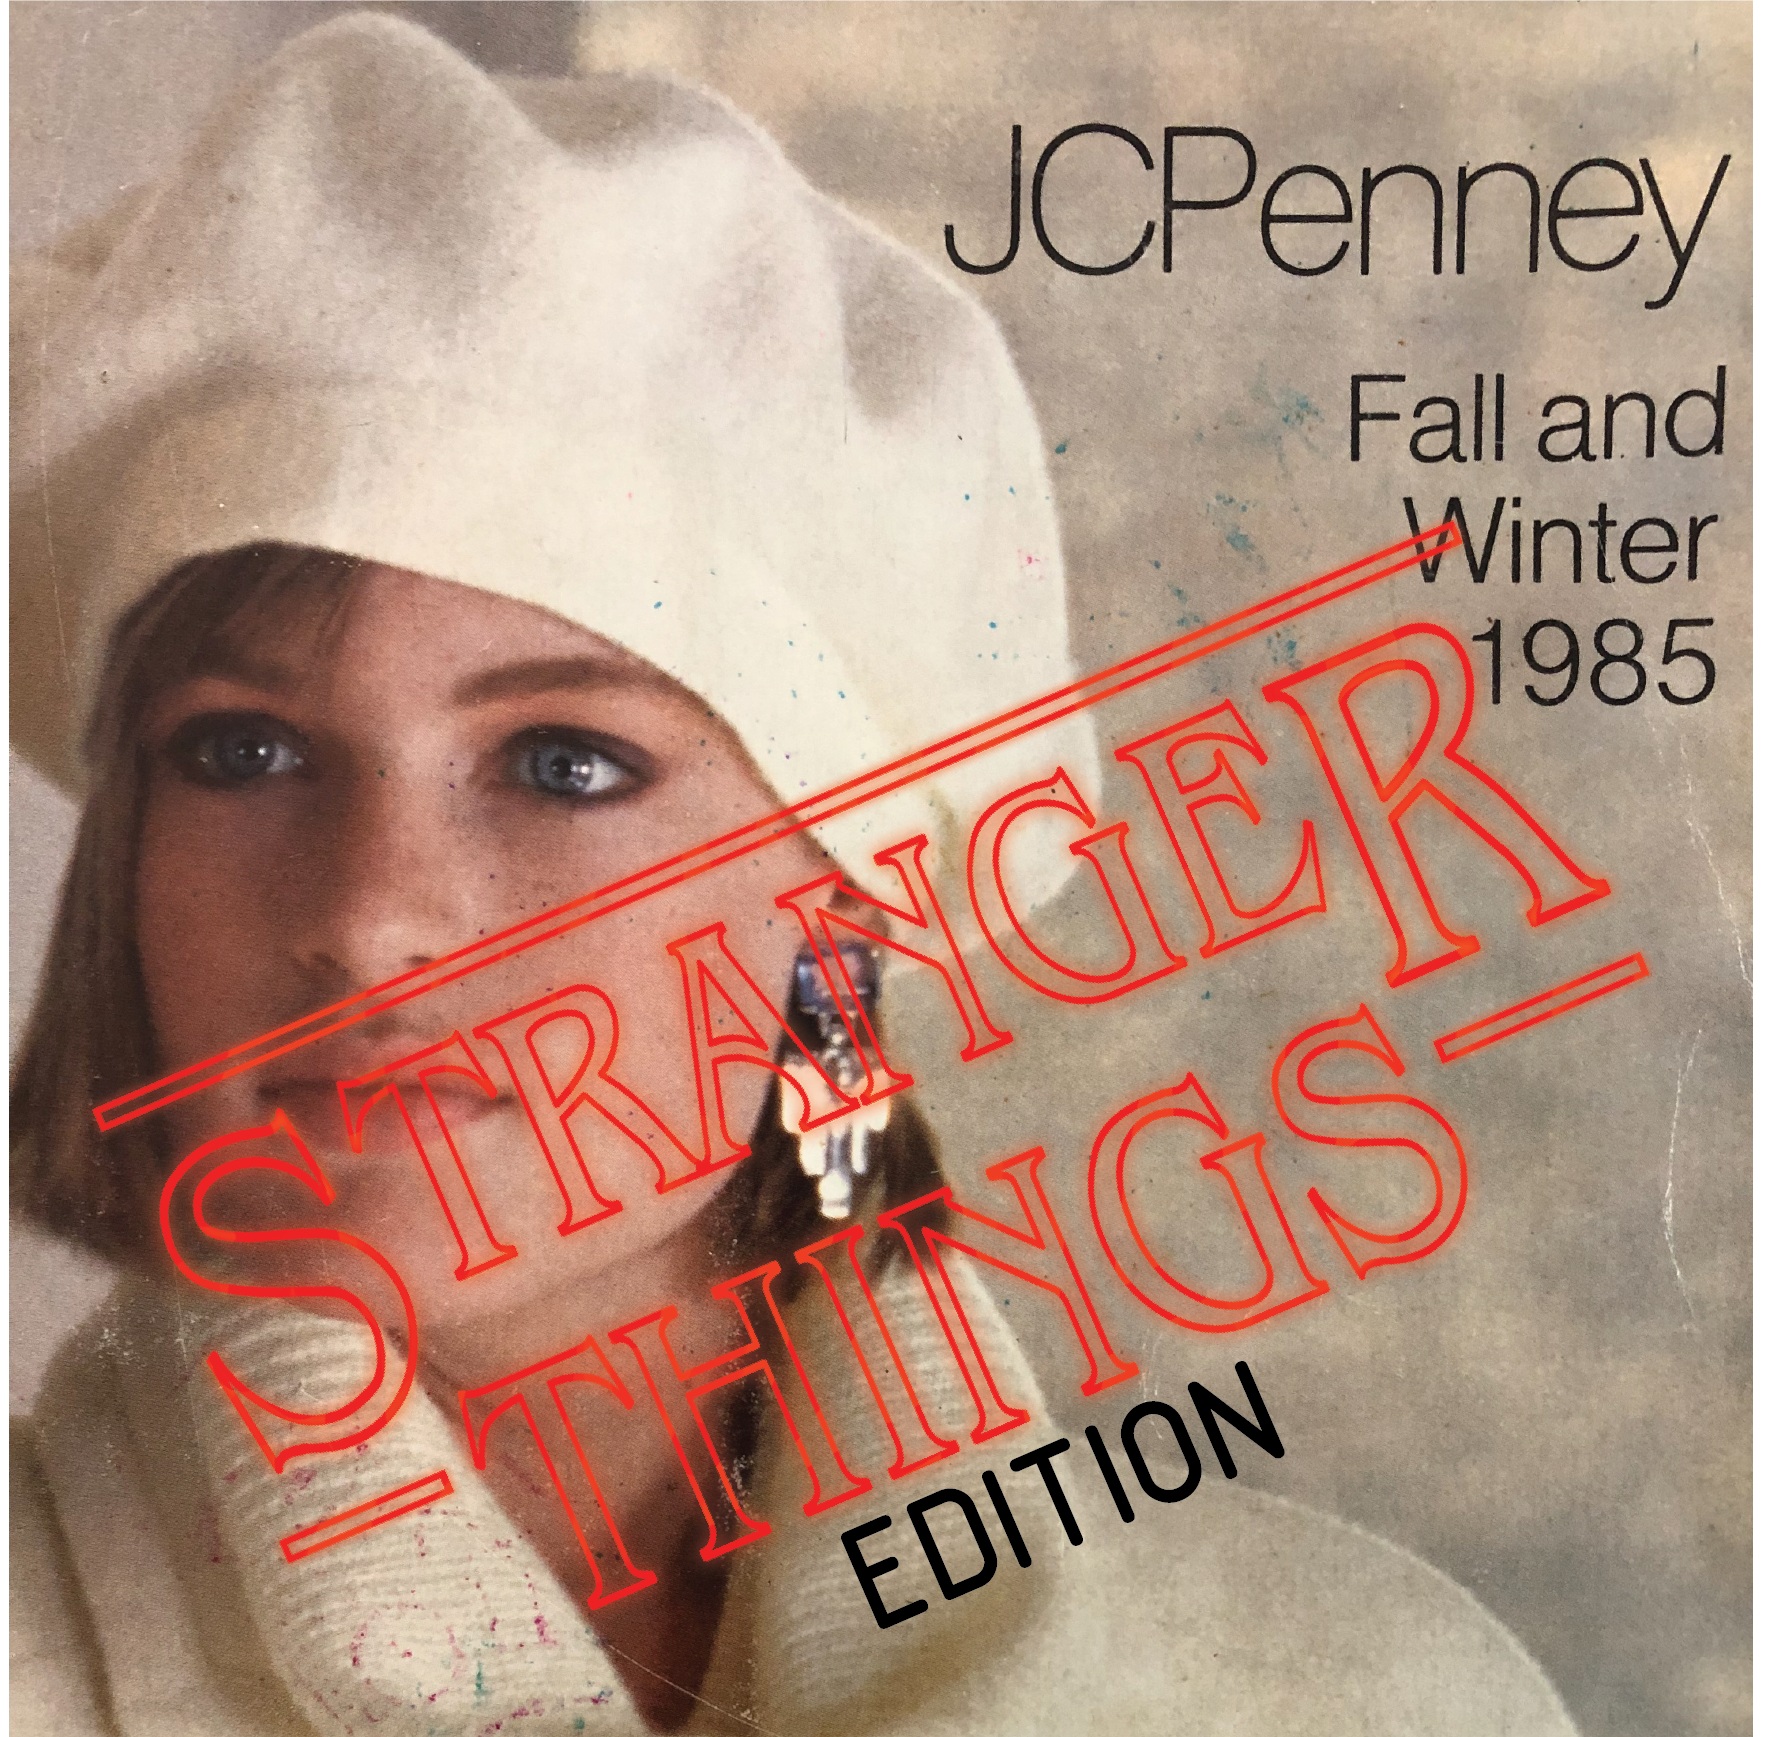 STRANGER THINGS FROM THE 1985 JCPENNEY CATALOG — Section22 LLC